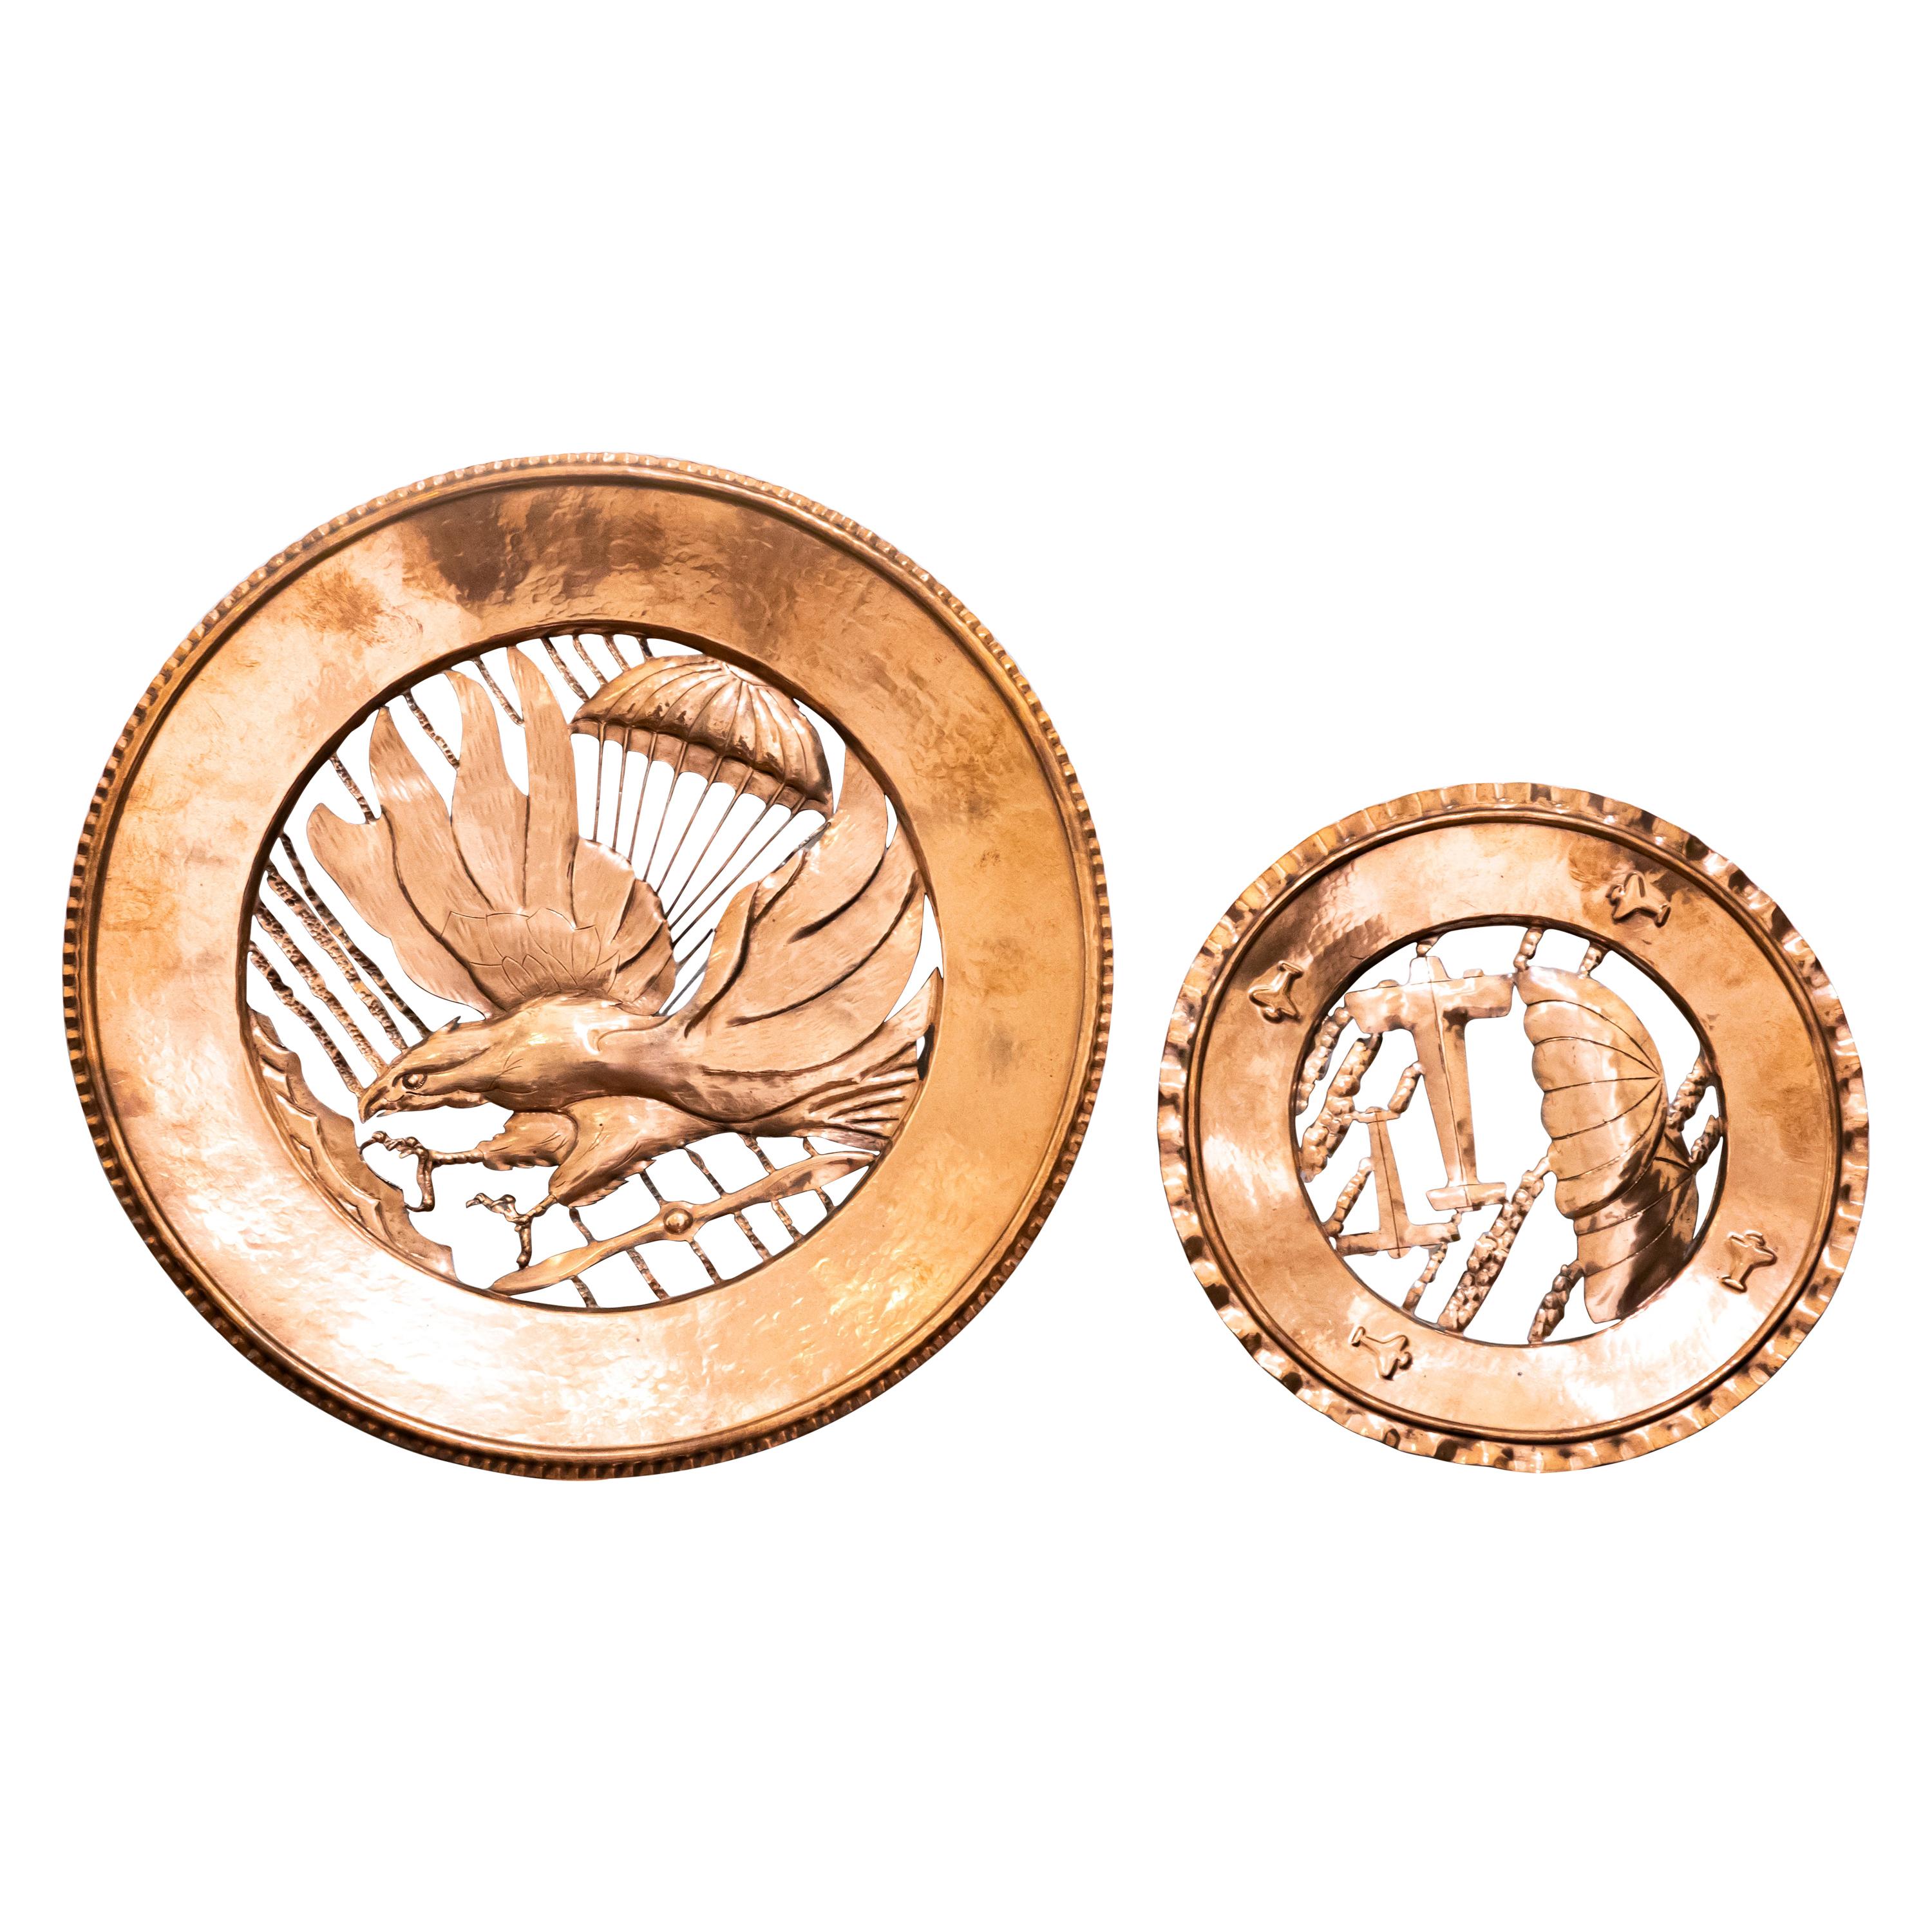 Pair of Vintage Copper Decorative Plates, Italy, 1930s For Sale